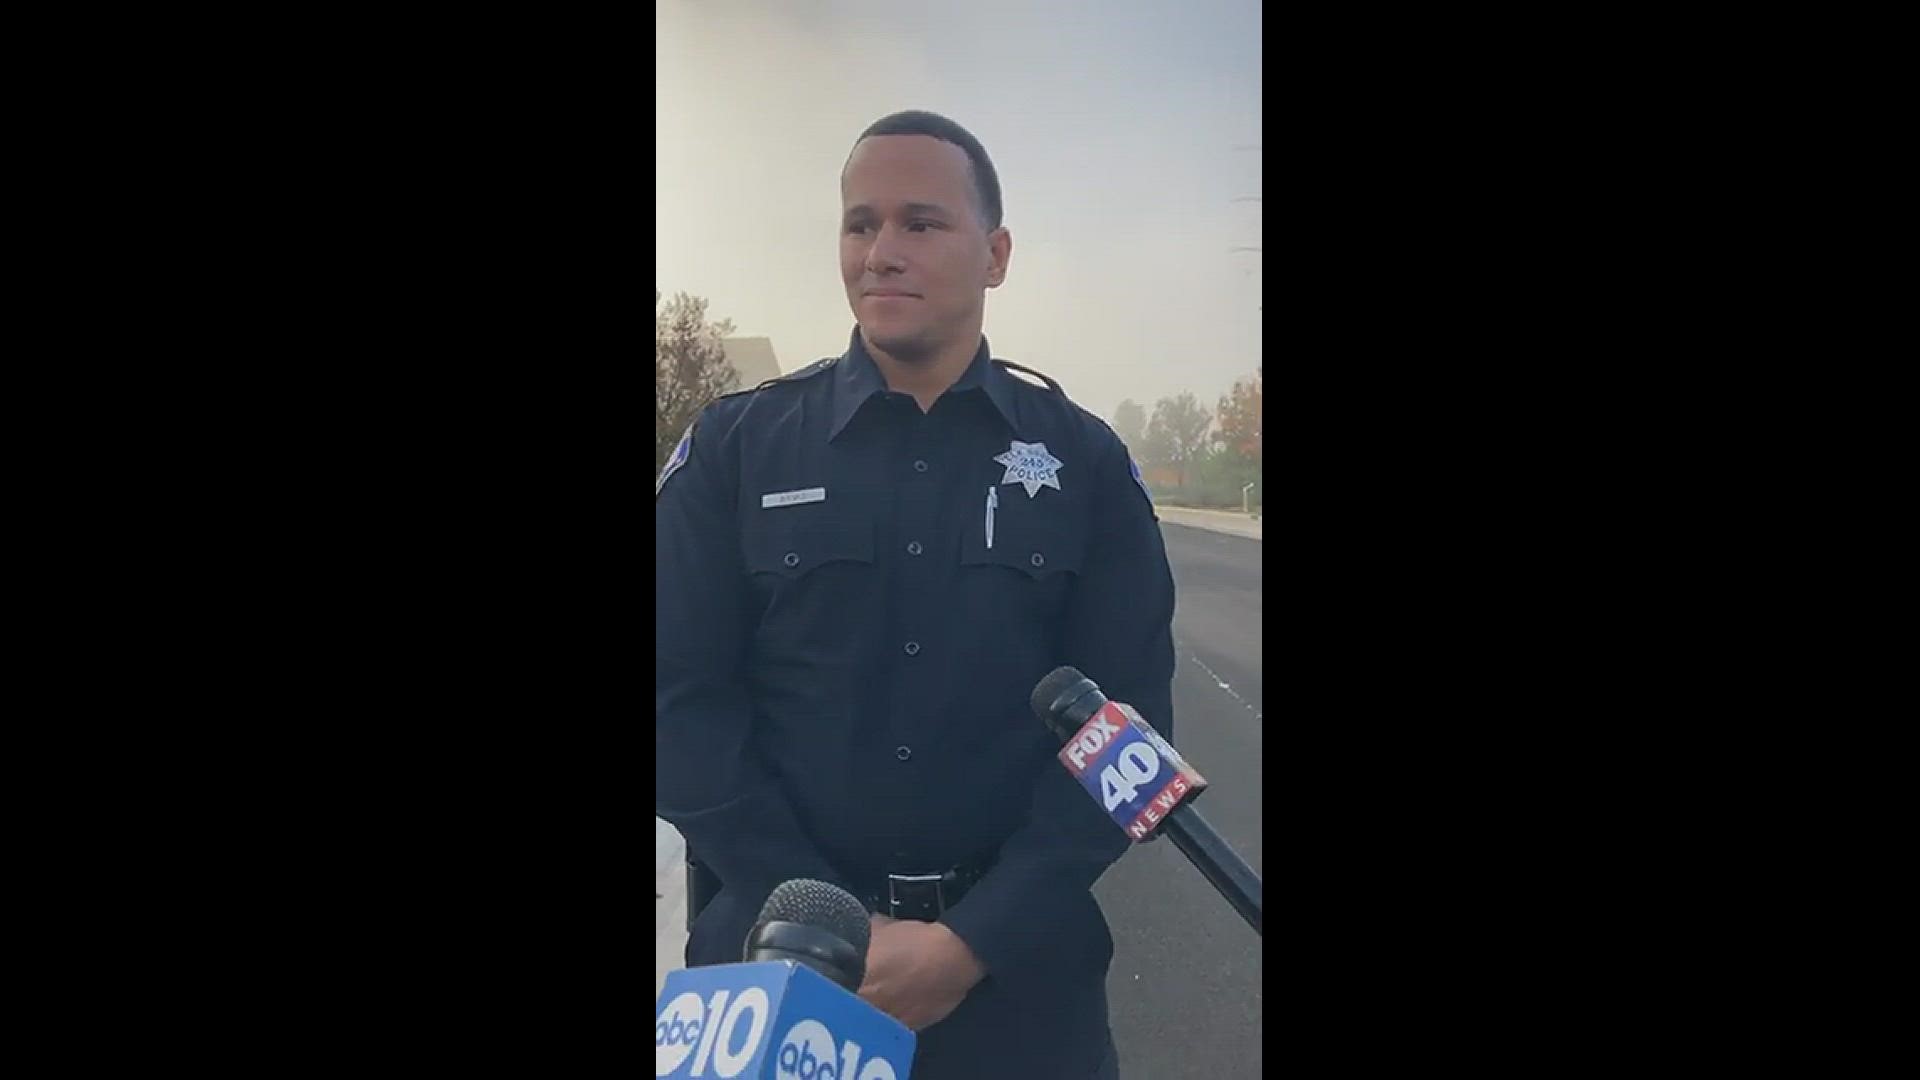 Our Lena Howland is getting a live update from Elk Grove PD following nearly a 12 hour standoff with a barricaded suspect near Tusk and Ammolite way in Elk Grove.